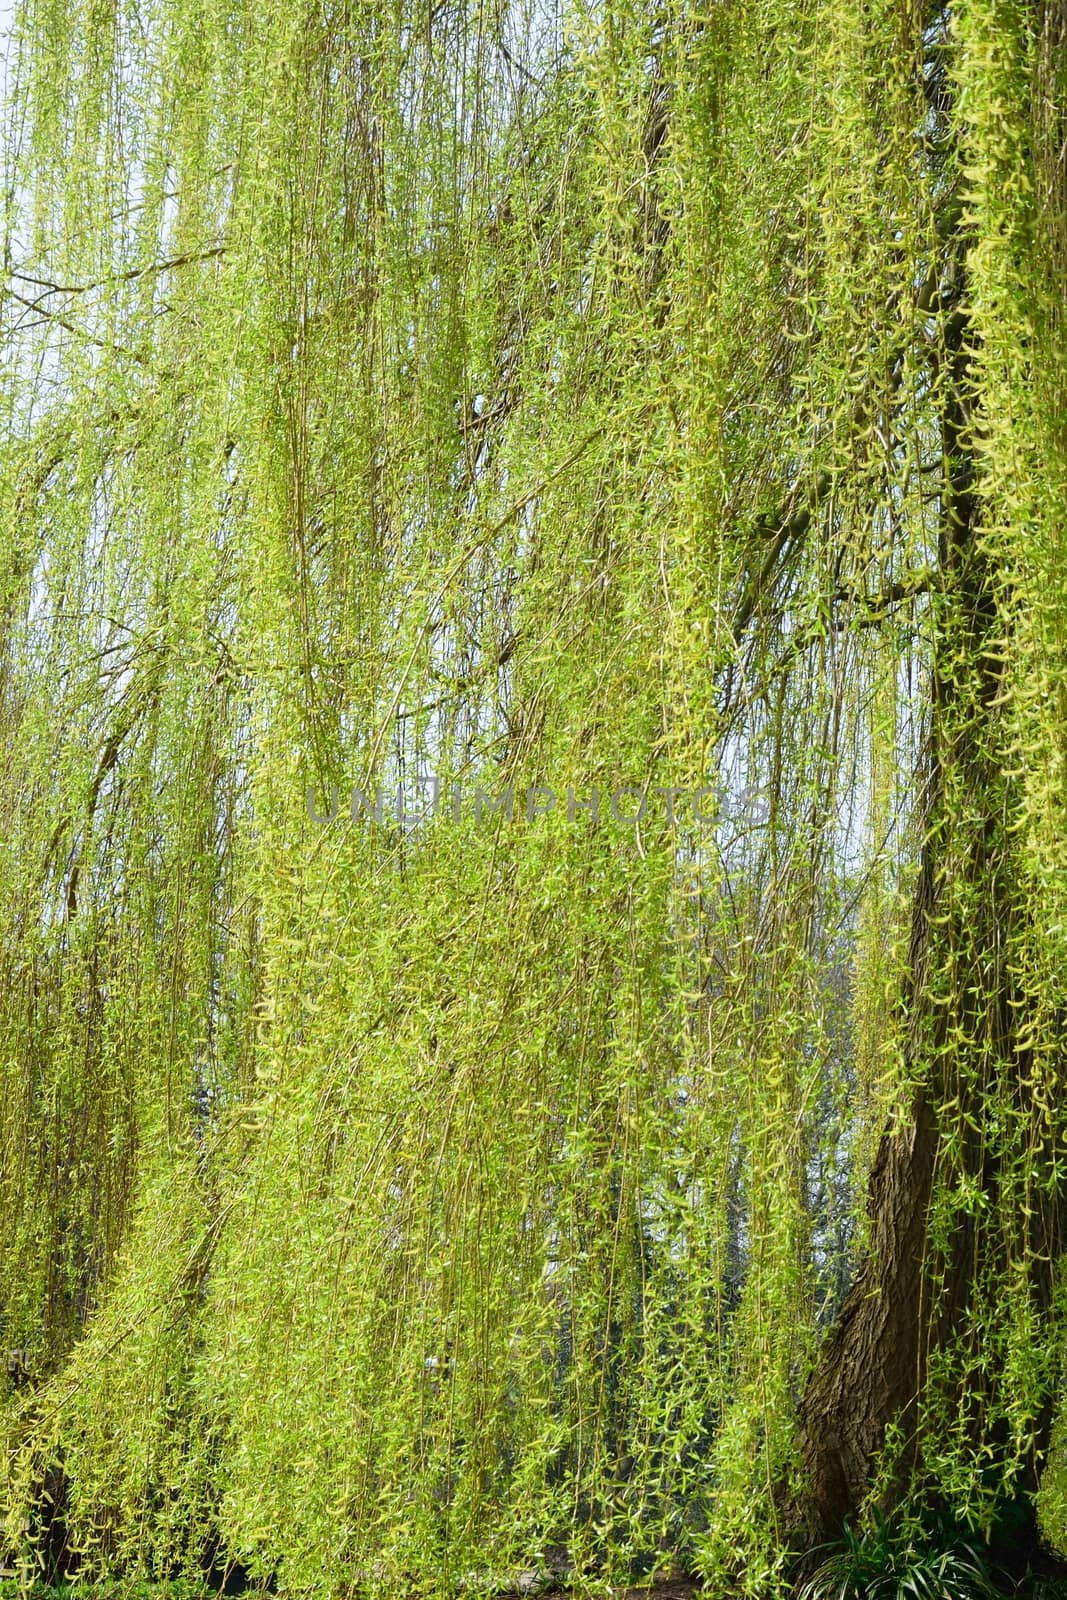 Willow tree by pauws99